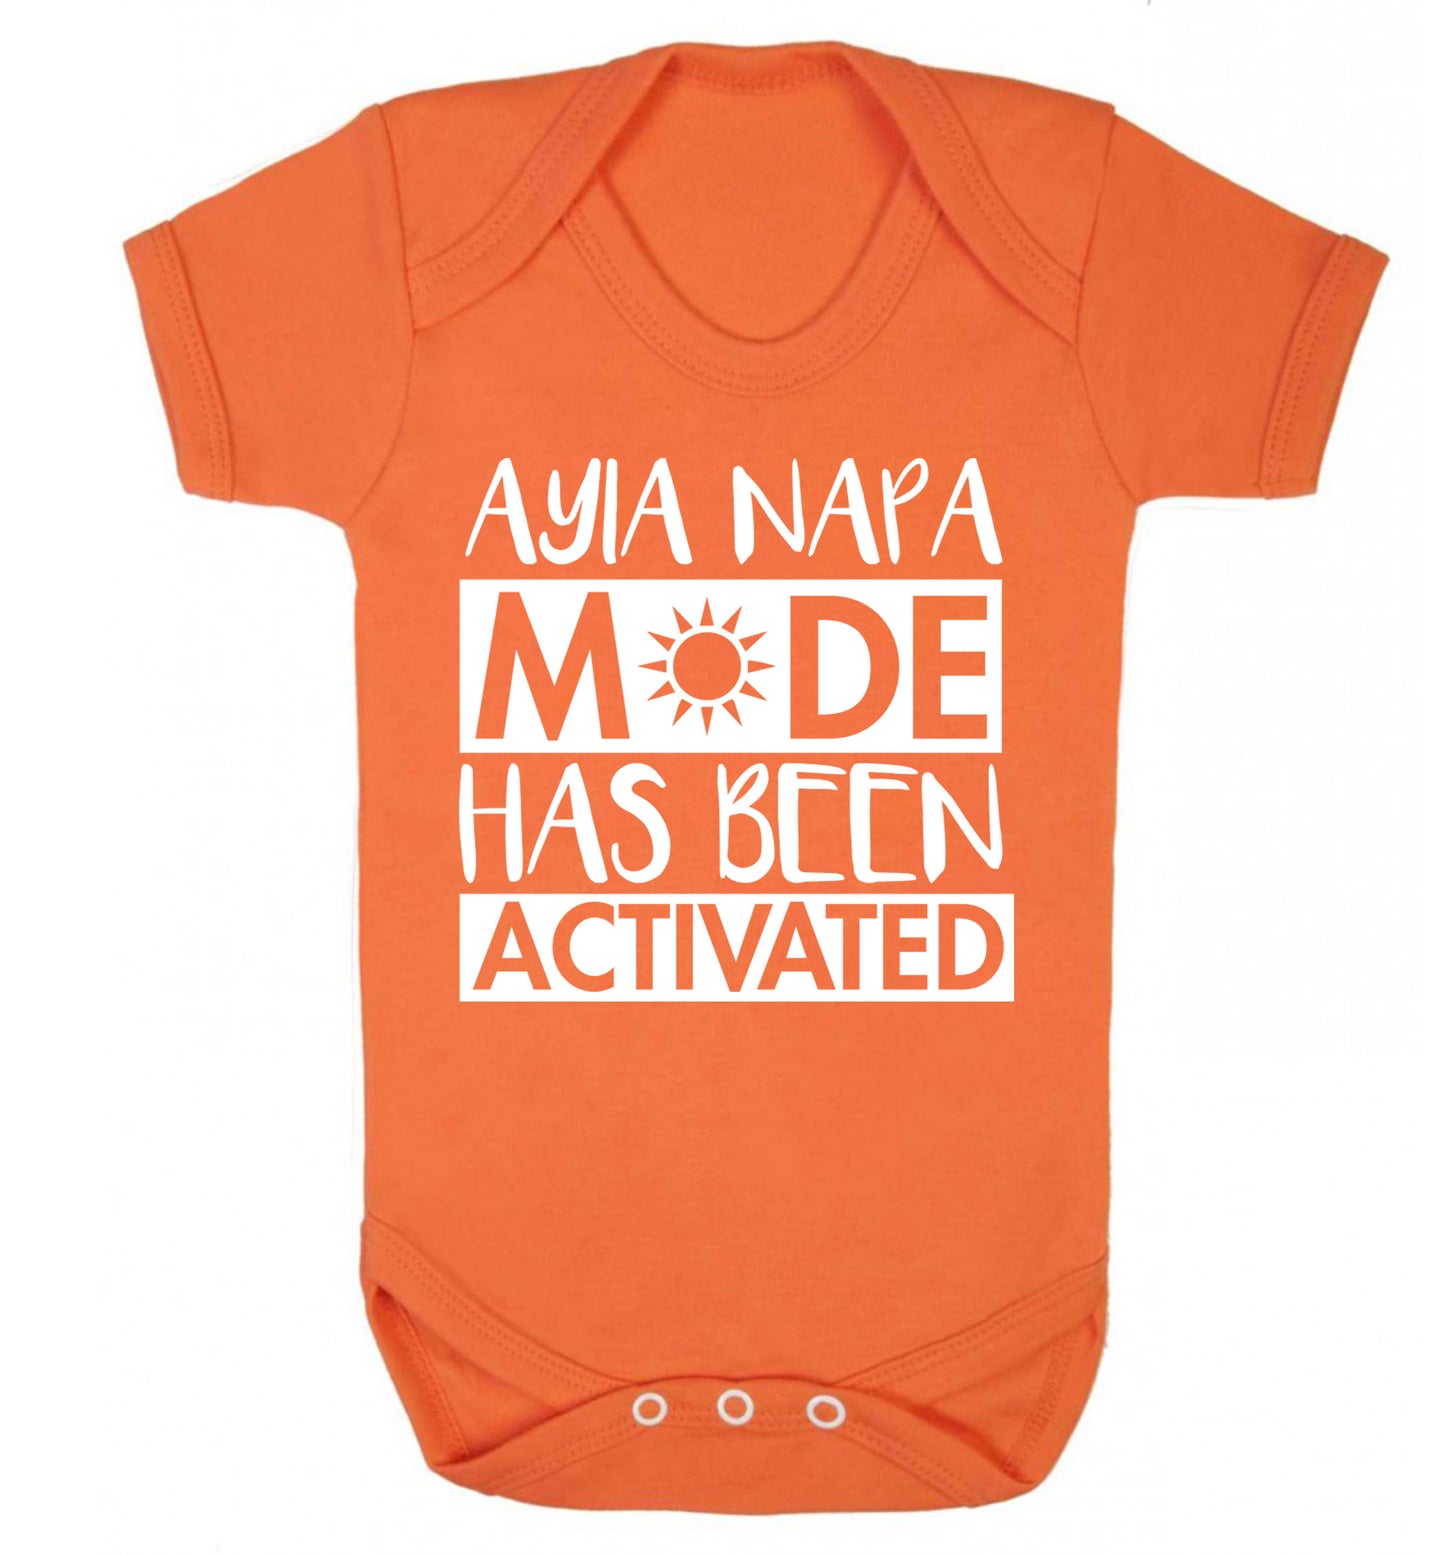 Ayia Napa mode has been activated Baby Vest orange 18-24 months